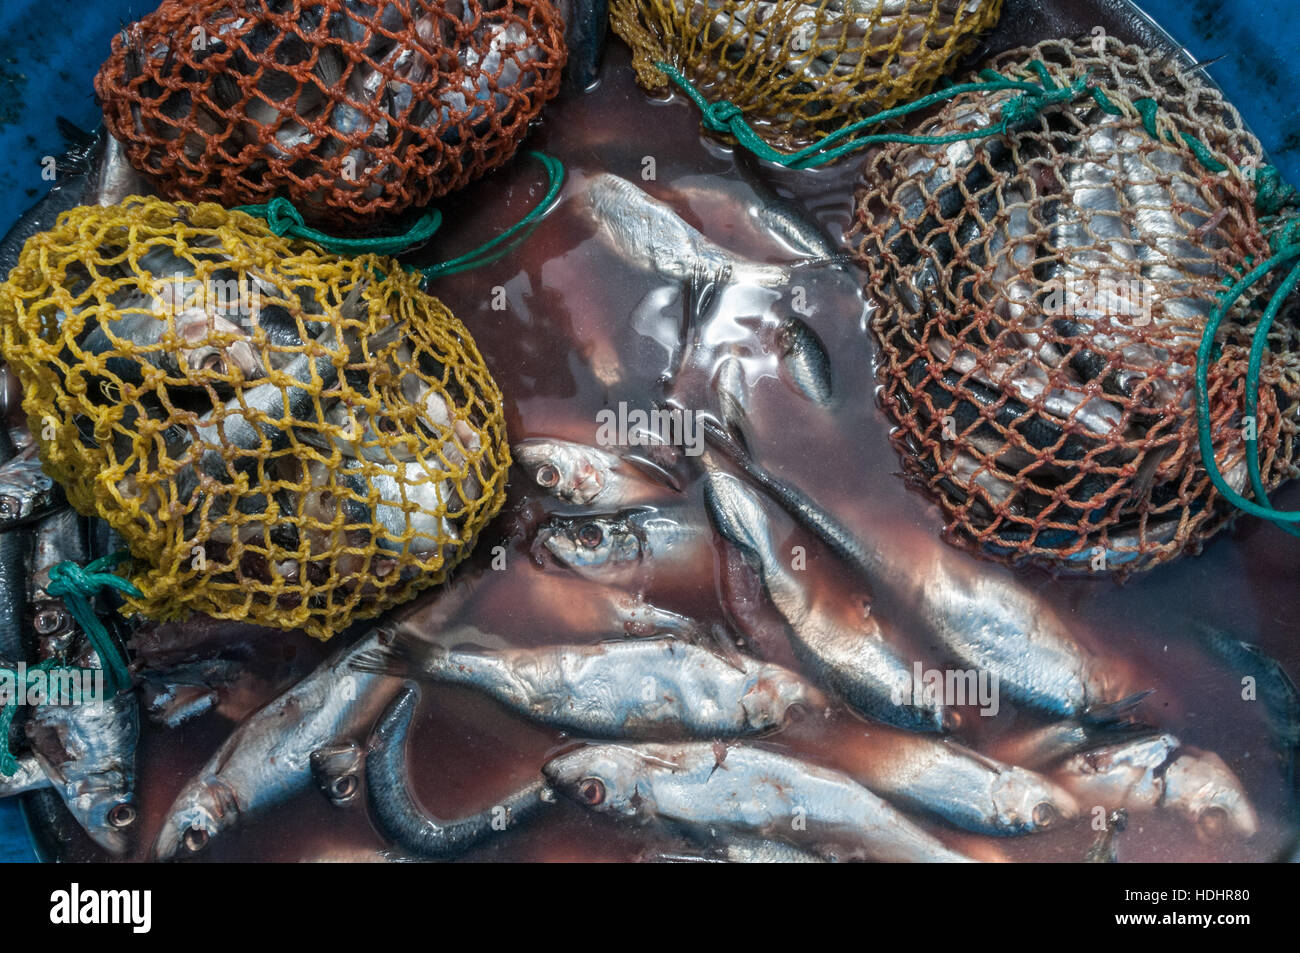 Lobster bait bags full of herring; Yarmouth Stock Photo